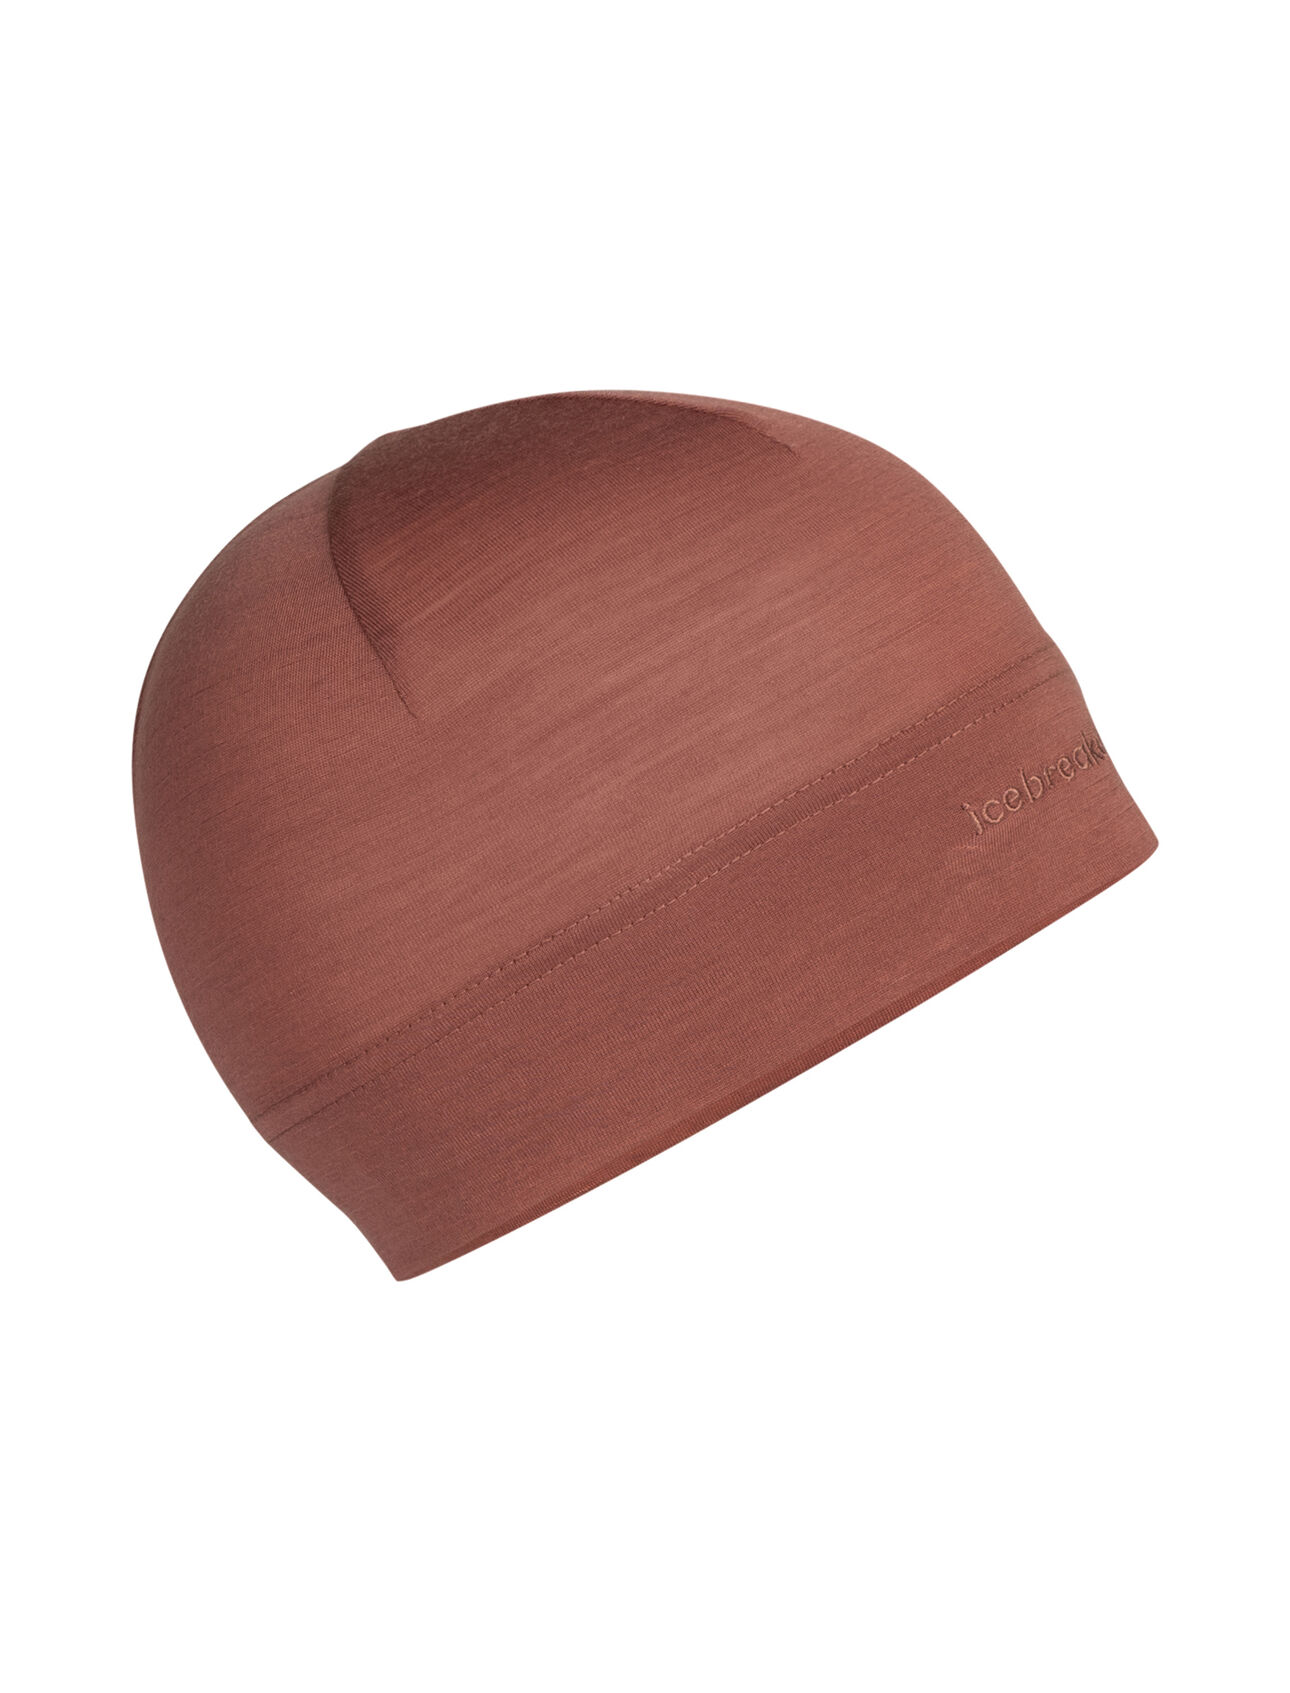 Unisex Cool-Lite™ Merino Flexi Beanie Our stretchy, ultralight merino wool beanie for year-round performance, the Cool-Lite™ Flexi Beanie features soft, breathable and naturally odor resistant Cool-Lite™jersey fabric.